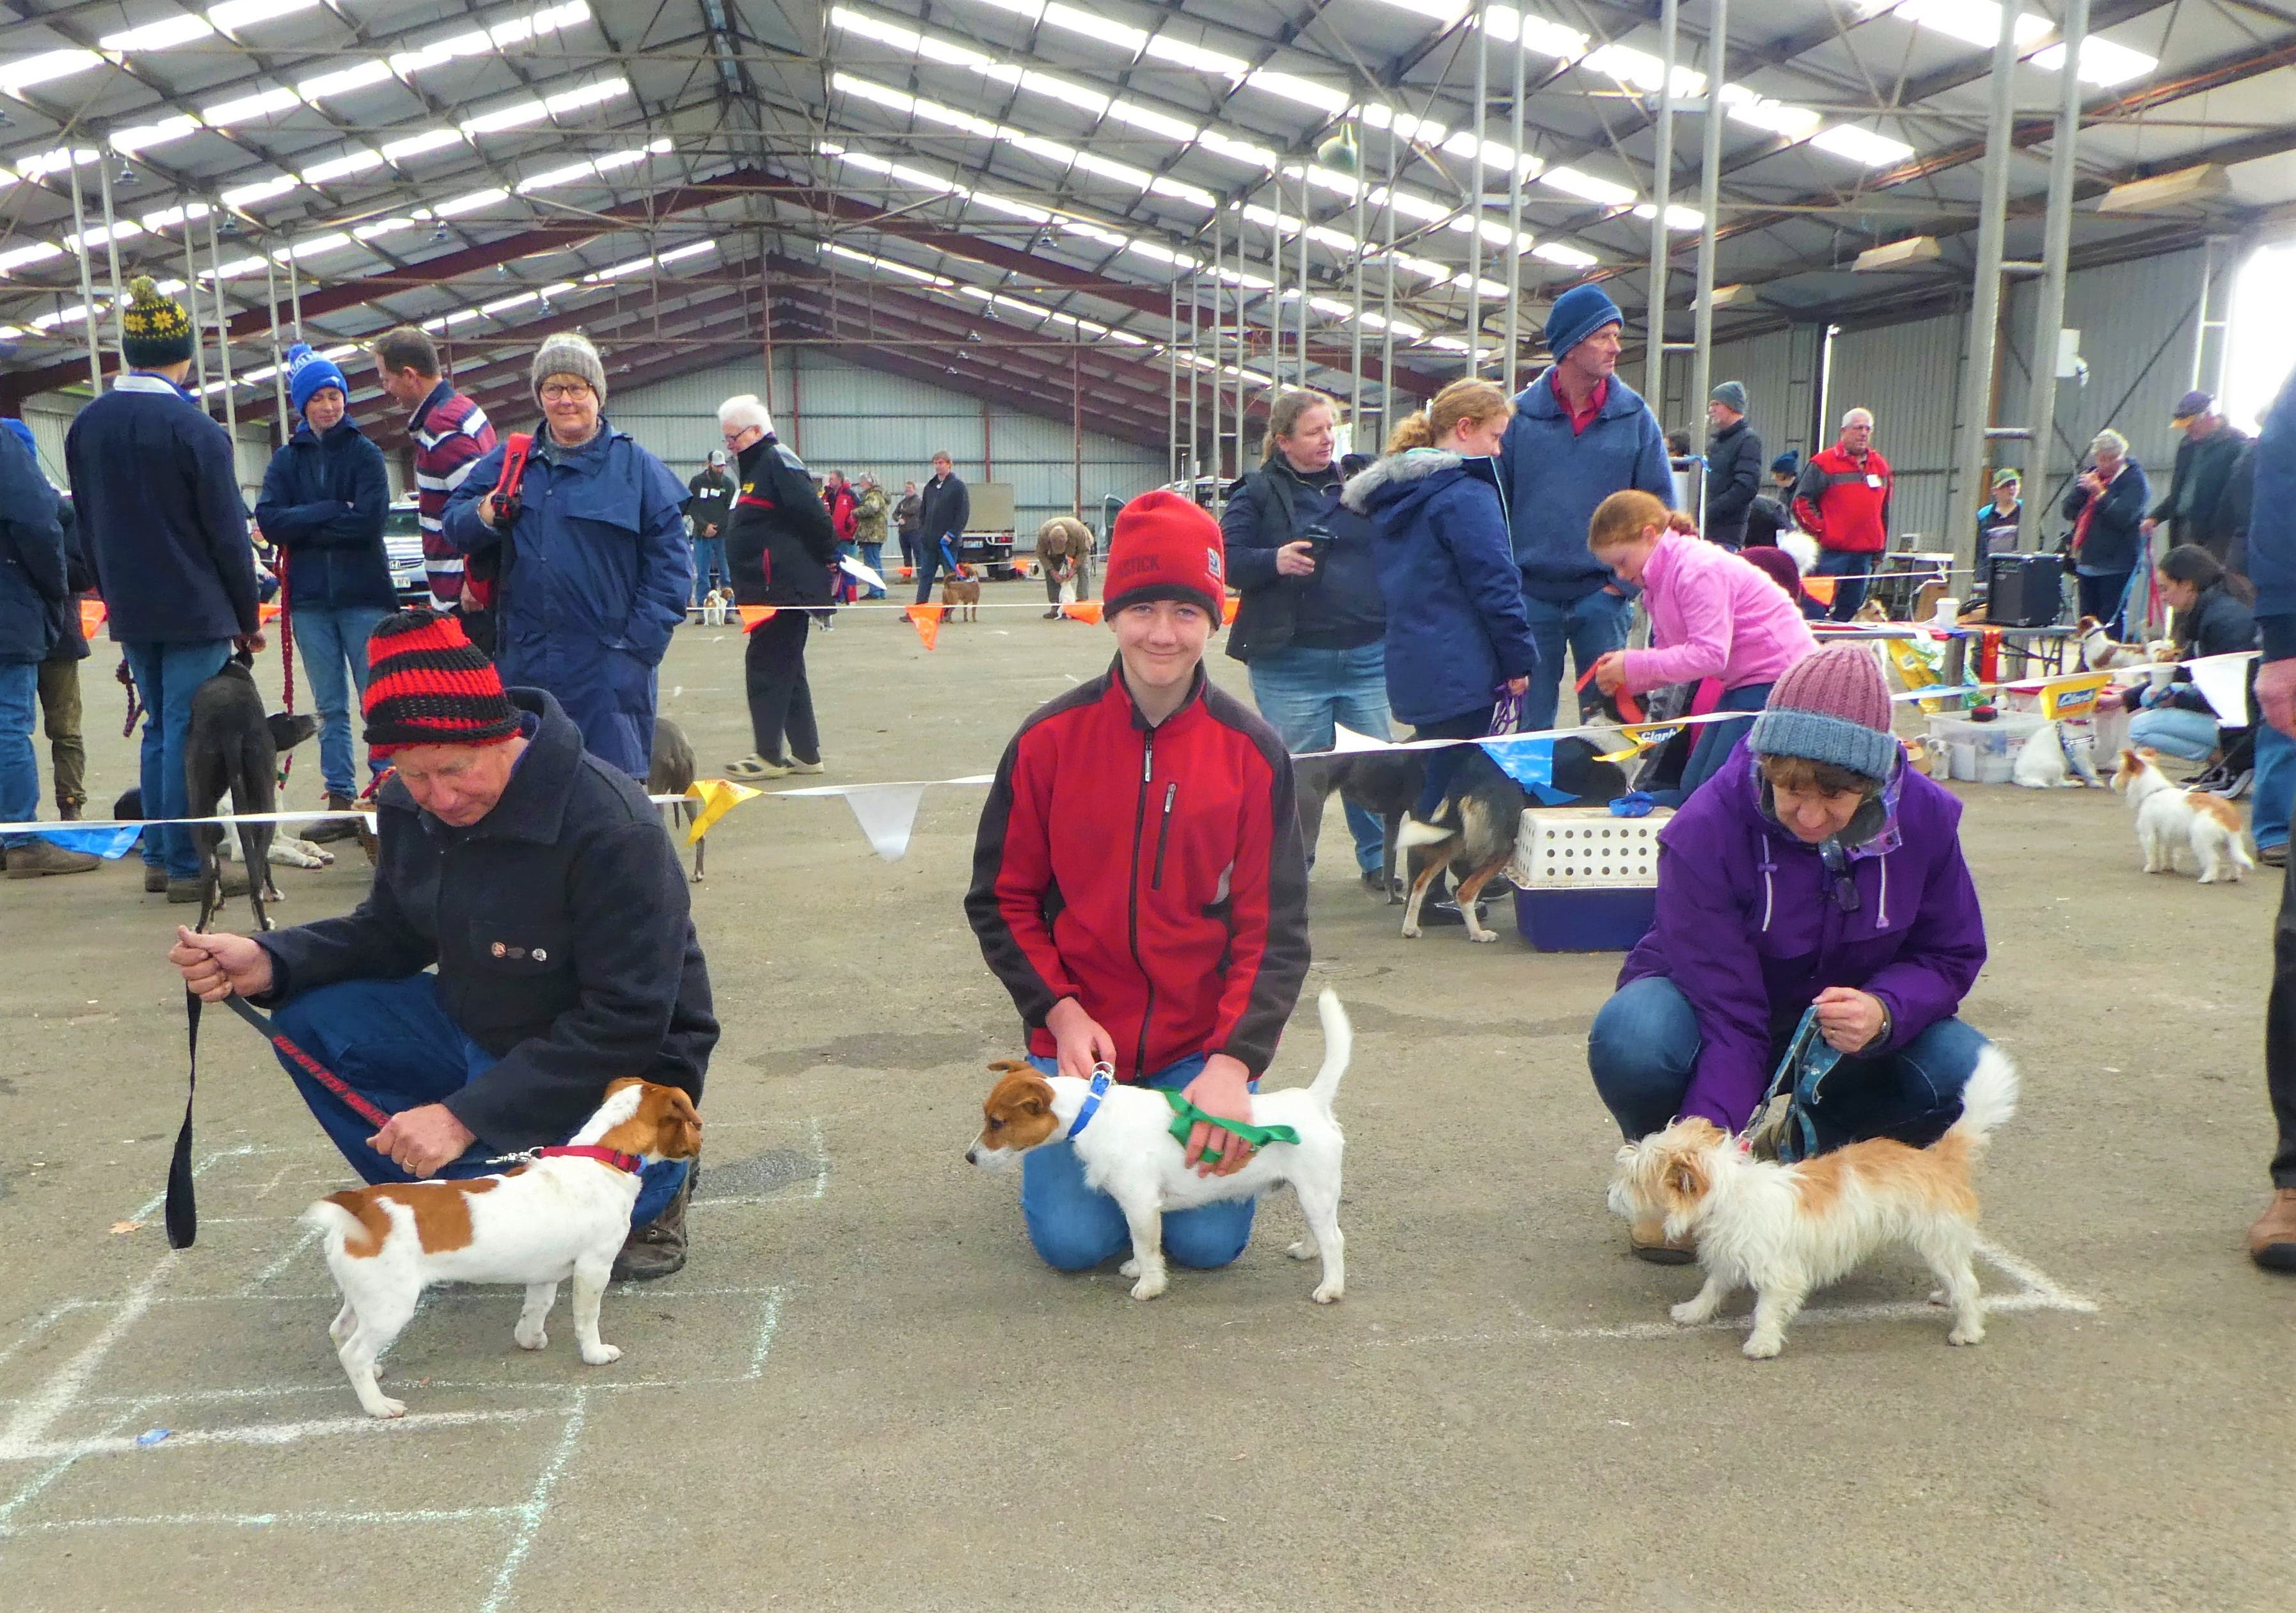 Hamilton Jack Russell Terrier and Hunting Dog Show - Carnarvon Accommodation